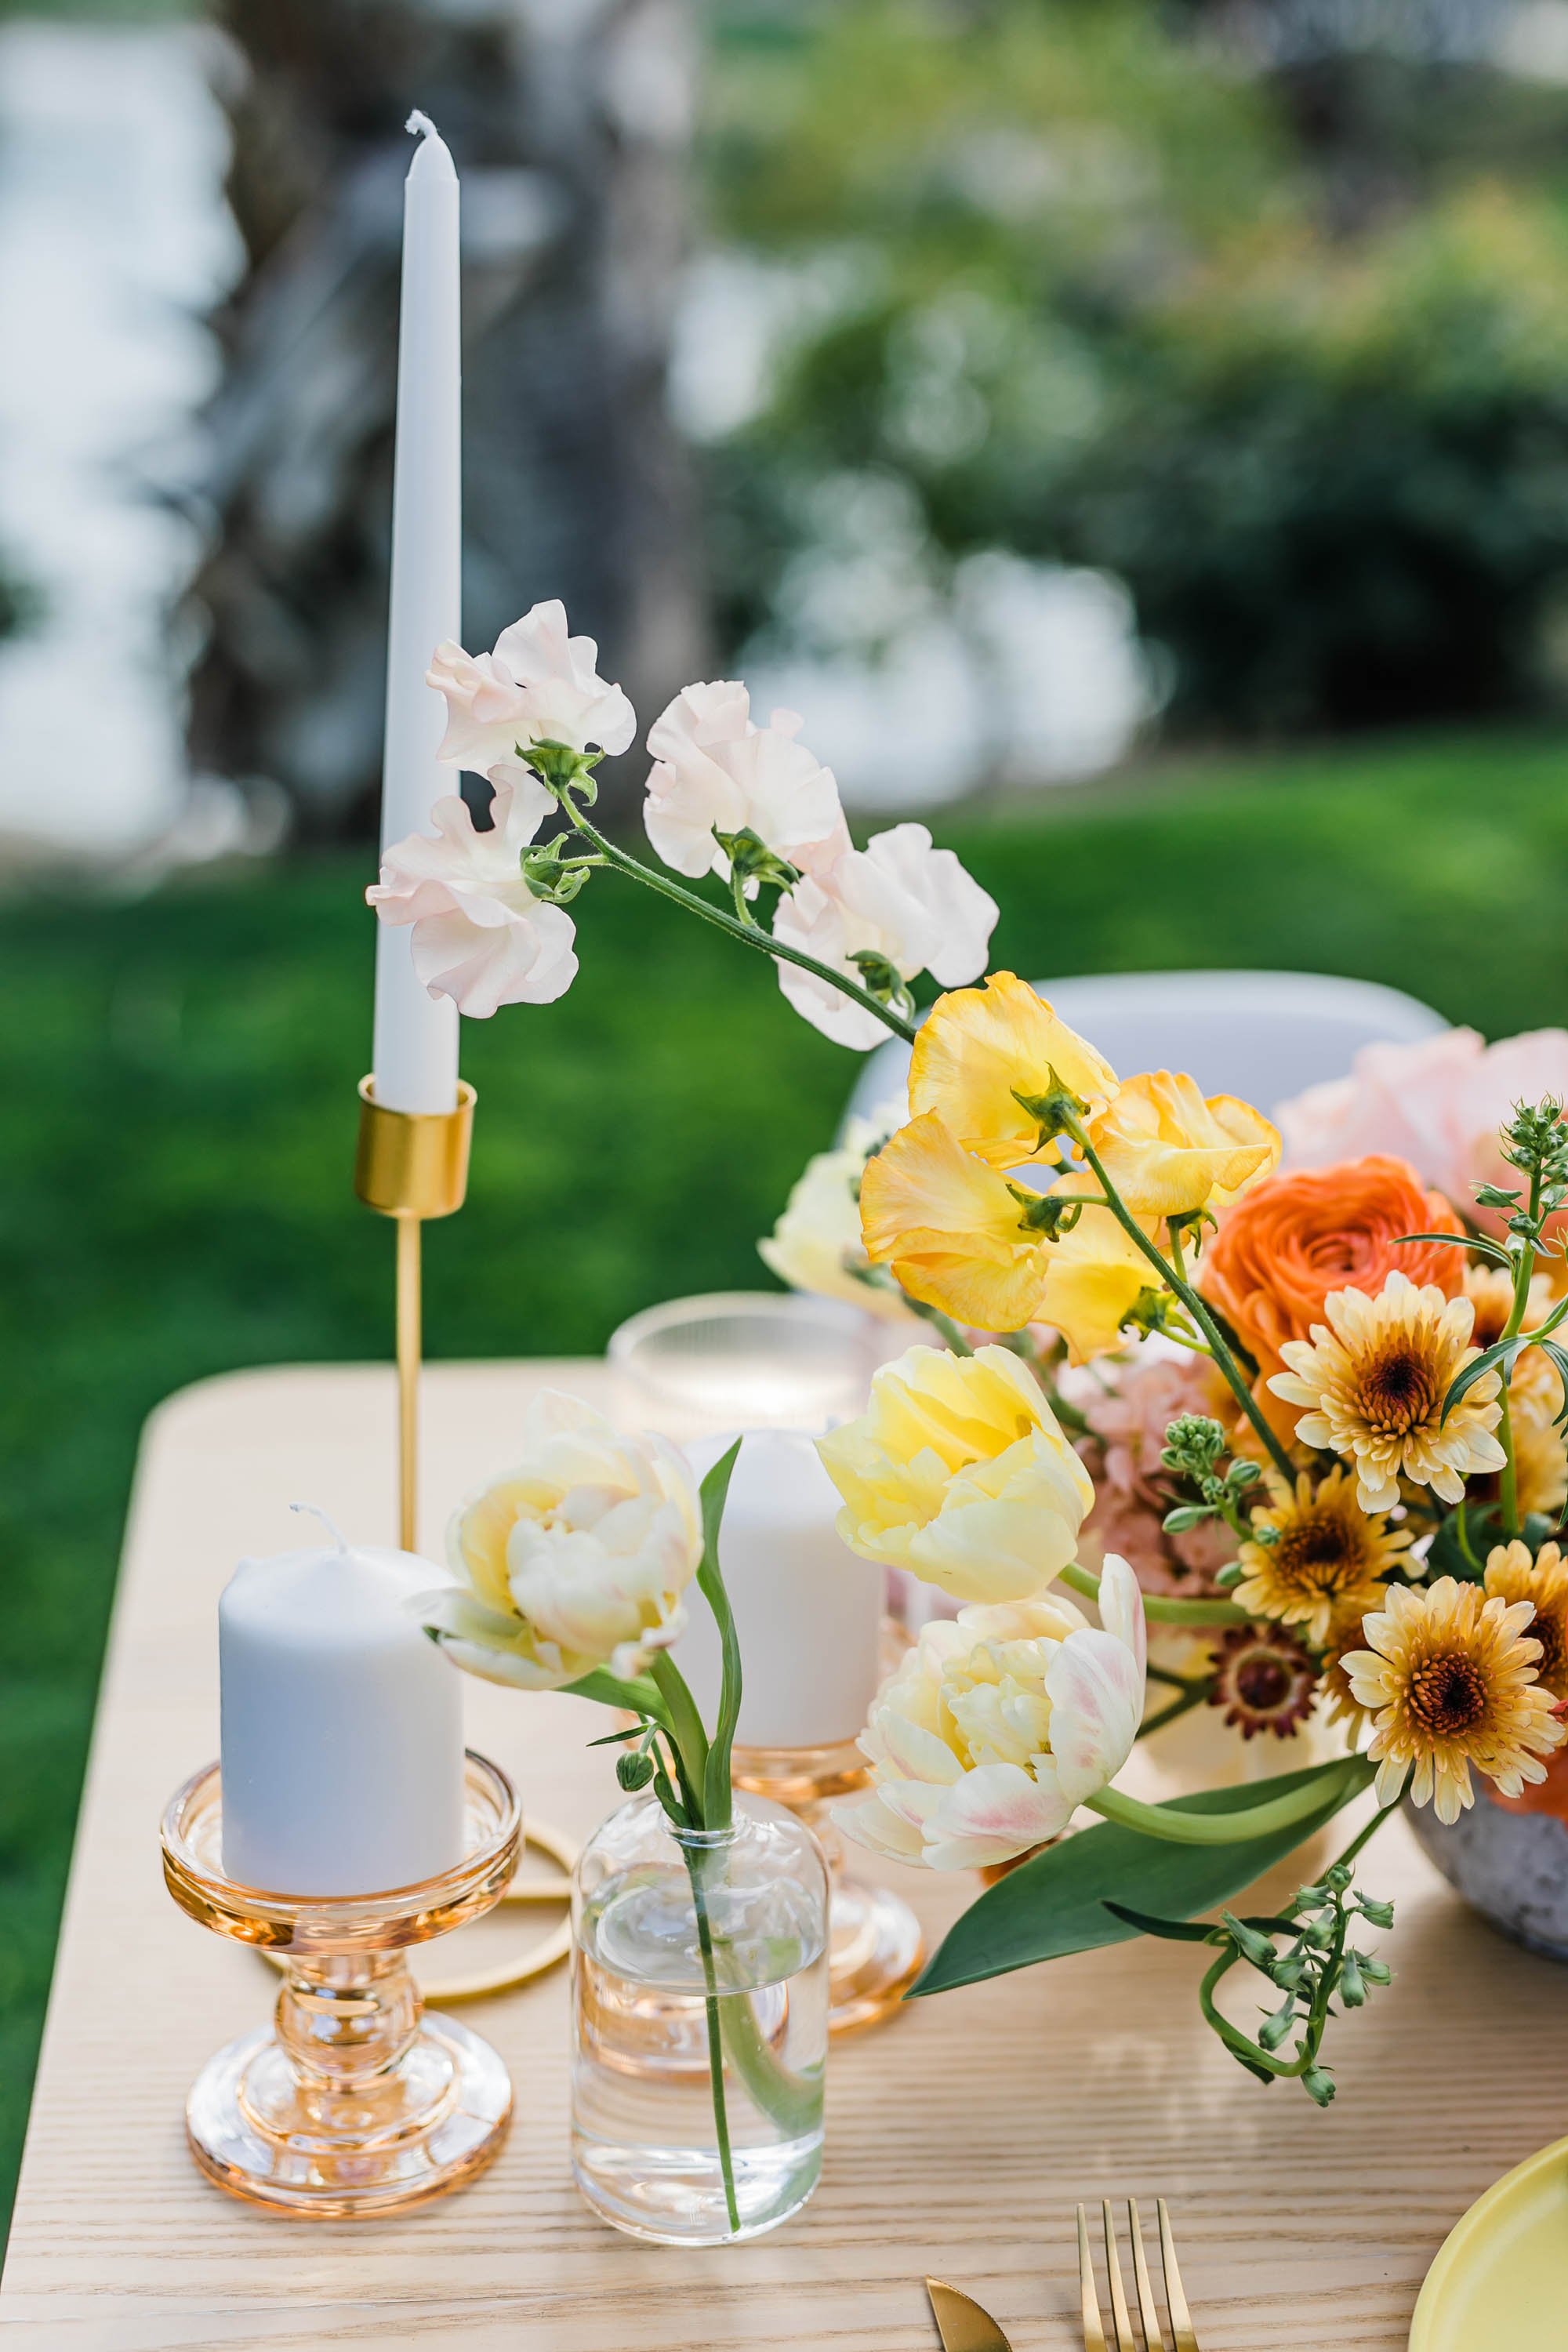 Bright sunny reception table scape flowers and wedding decor at Palm Springs wedding elopement at Bougainvillea Estate.